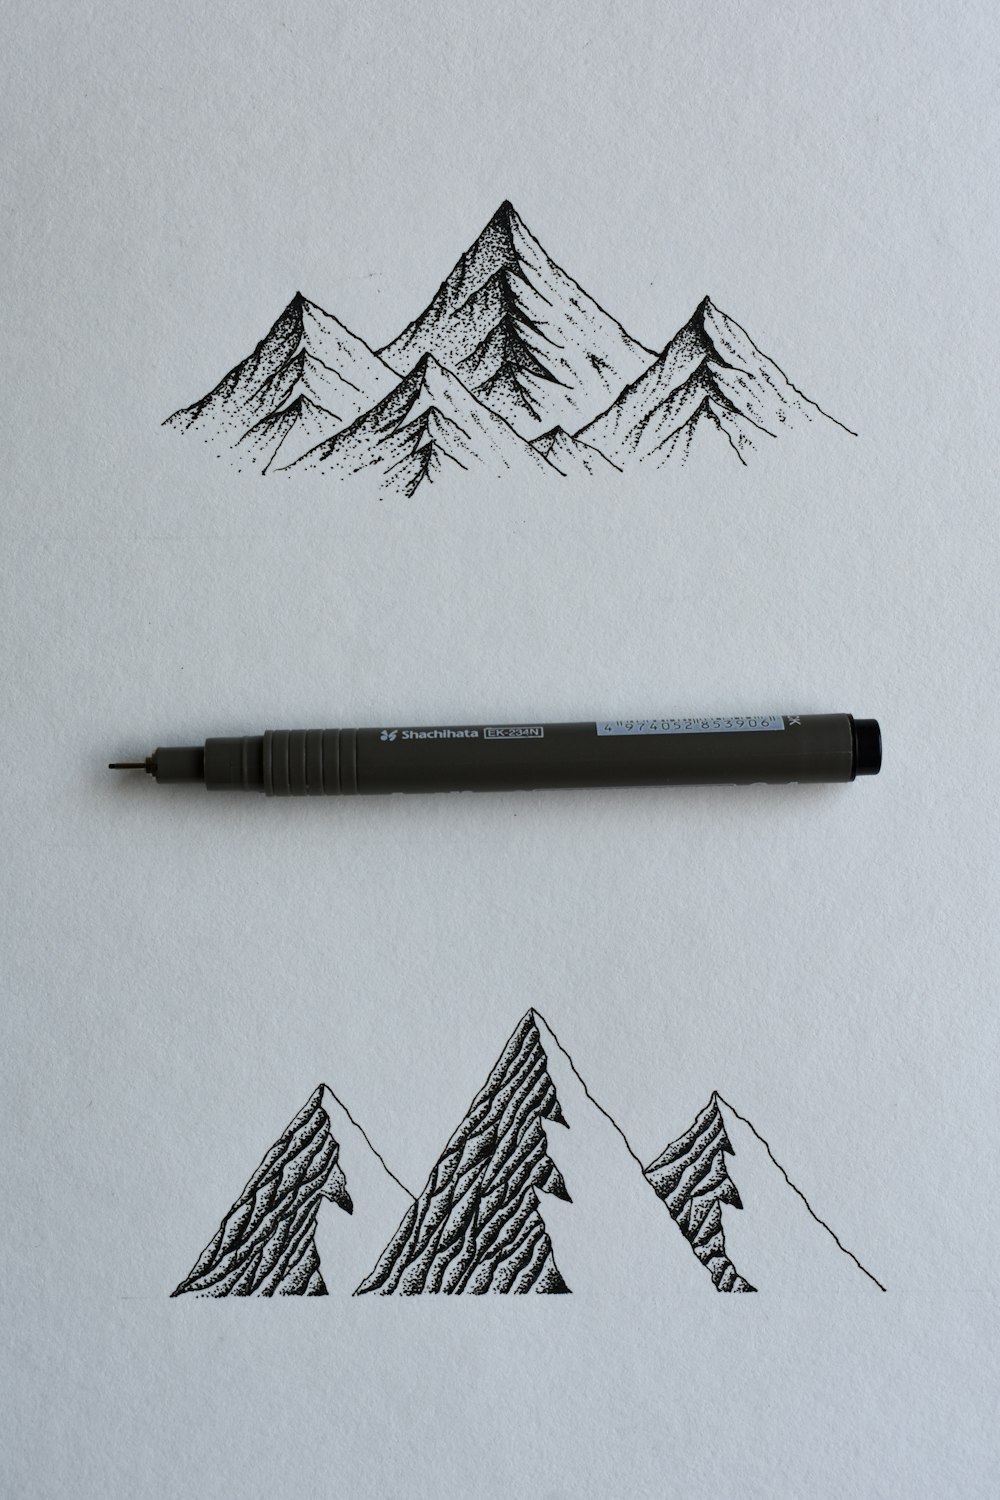 30,000+ Pen Drawing Pictures | Download Free Images on Unsplash